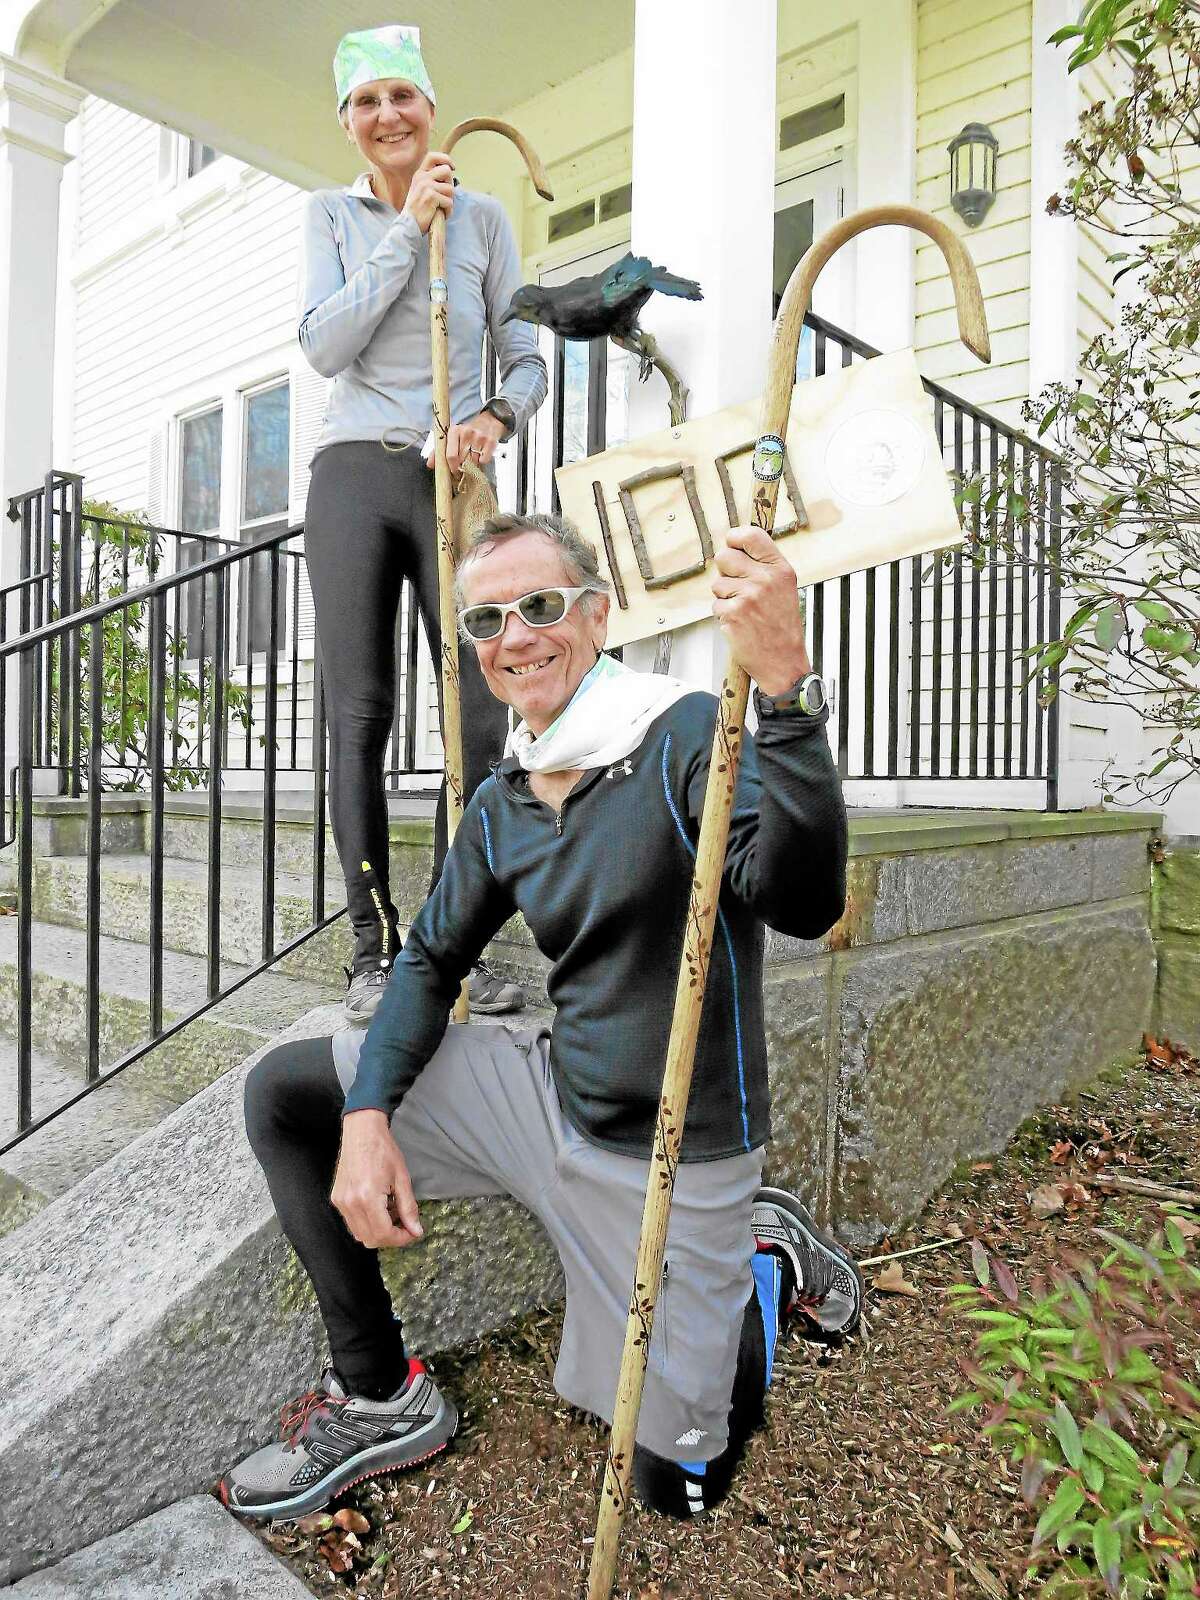 Contributed PhotoArt and Carol Morenz of Thomaston, CT finished the race a full 12 minutes before the closed competitor and received walking sticks as a prize.